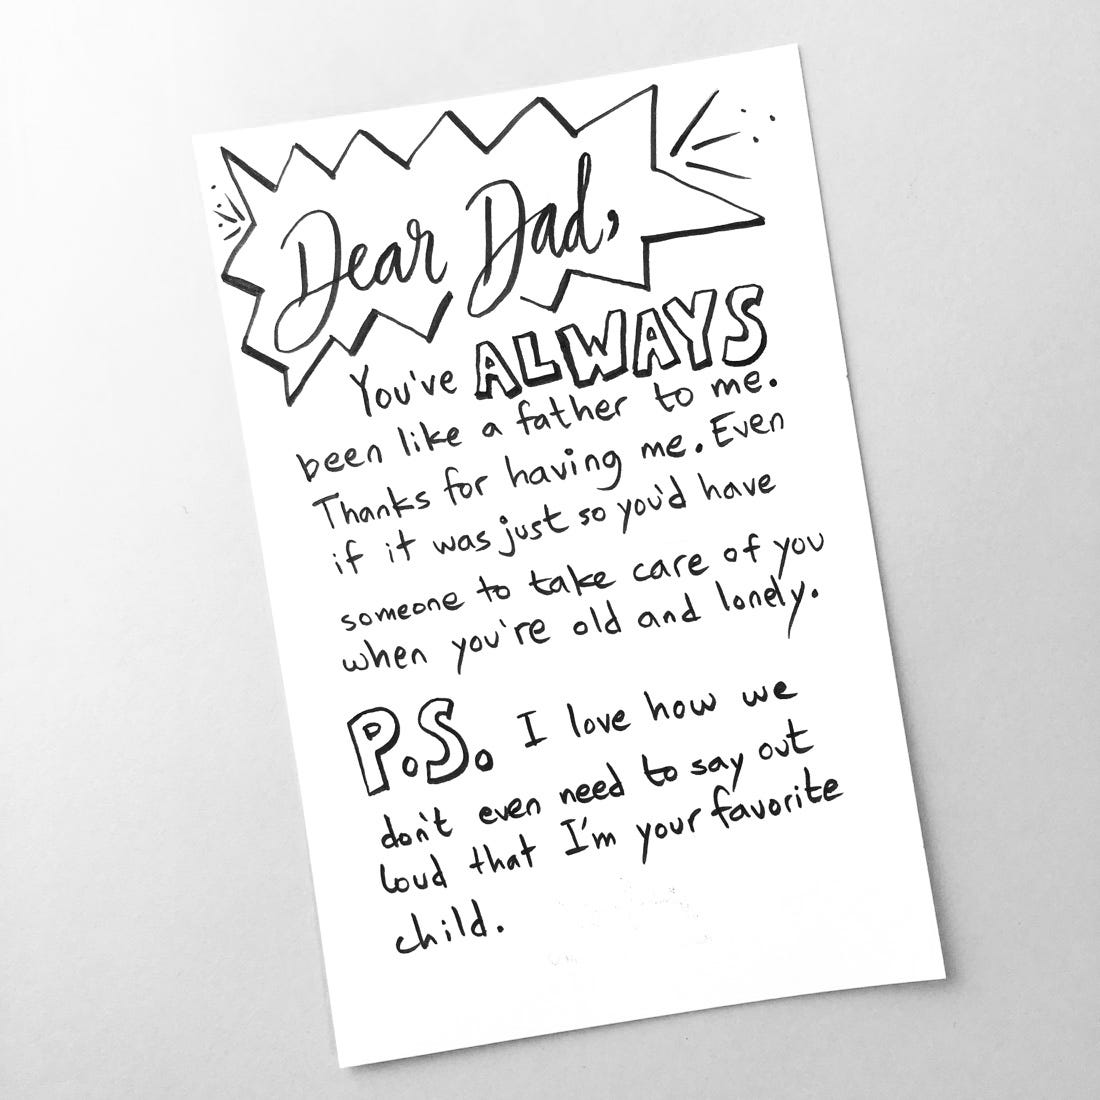 what-to-write-in-father-s-day-card-25-message-ideas-parade